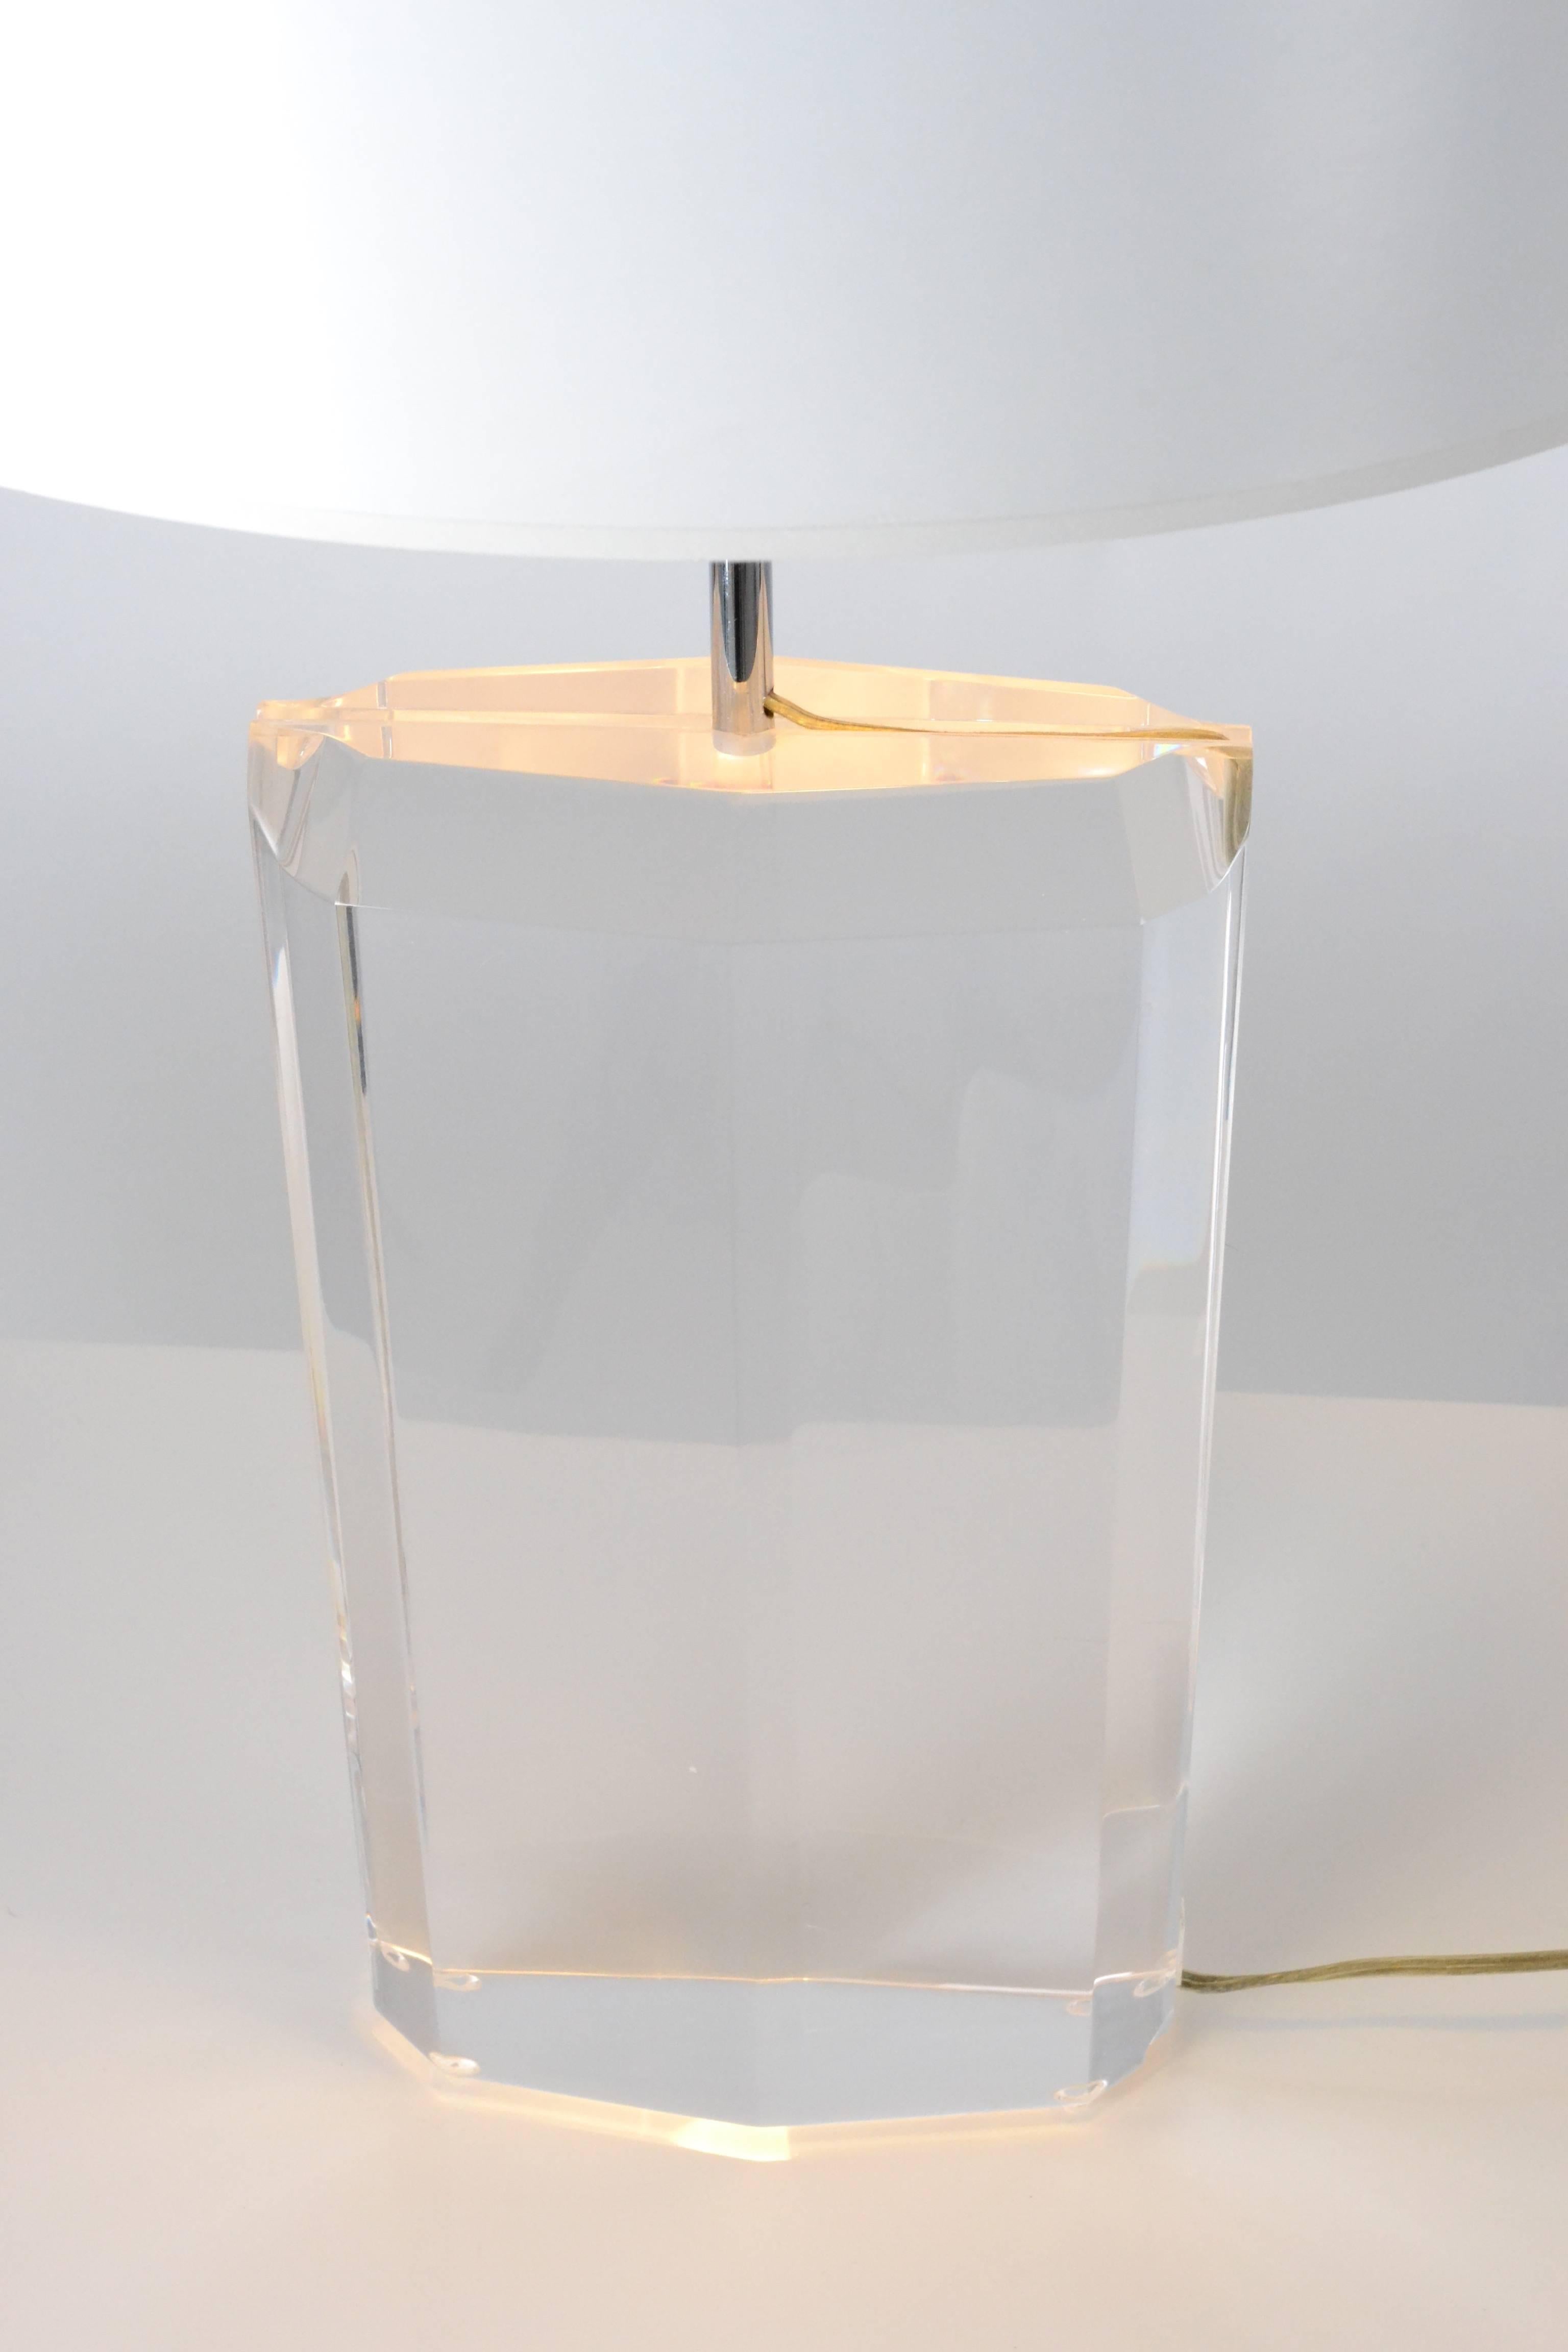 Quality Lucite lamp with solid fire polished lamp base, circa 1980s. Excellent condition. 

Dimensions: Width 8.25